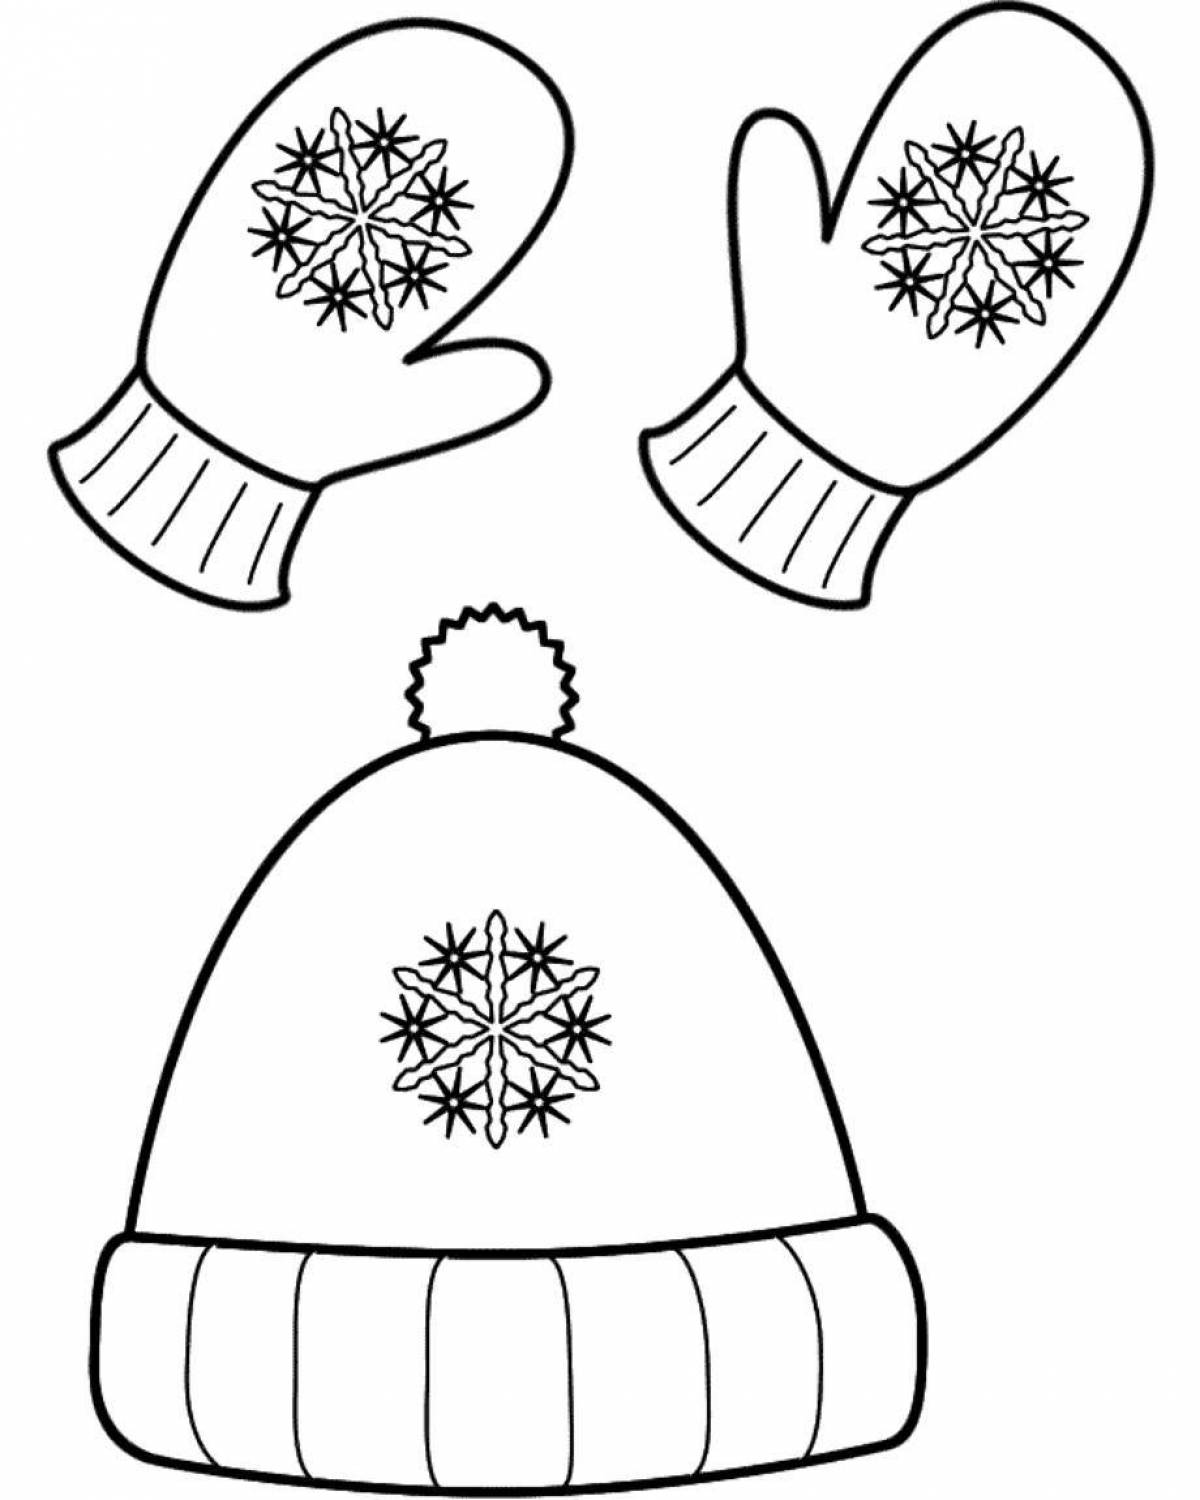 Colourful winter clothes coloring book for children 5-6 years old